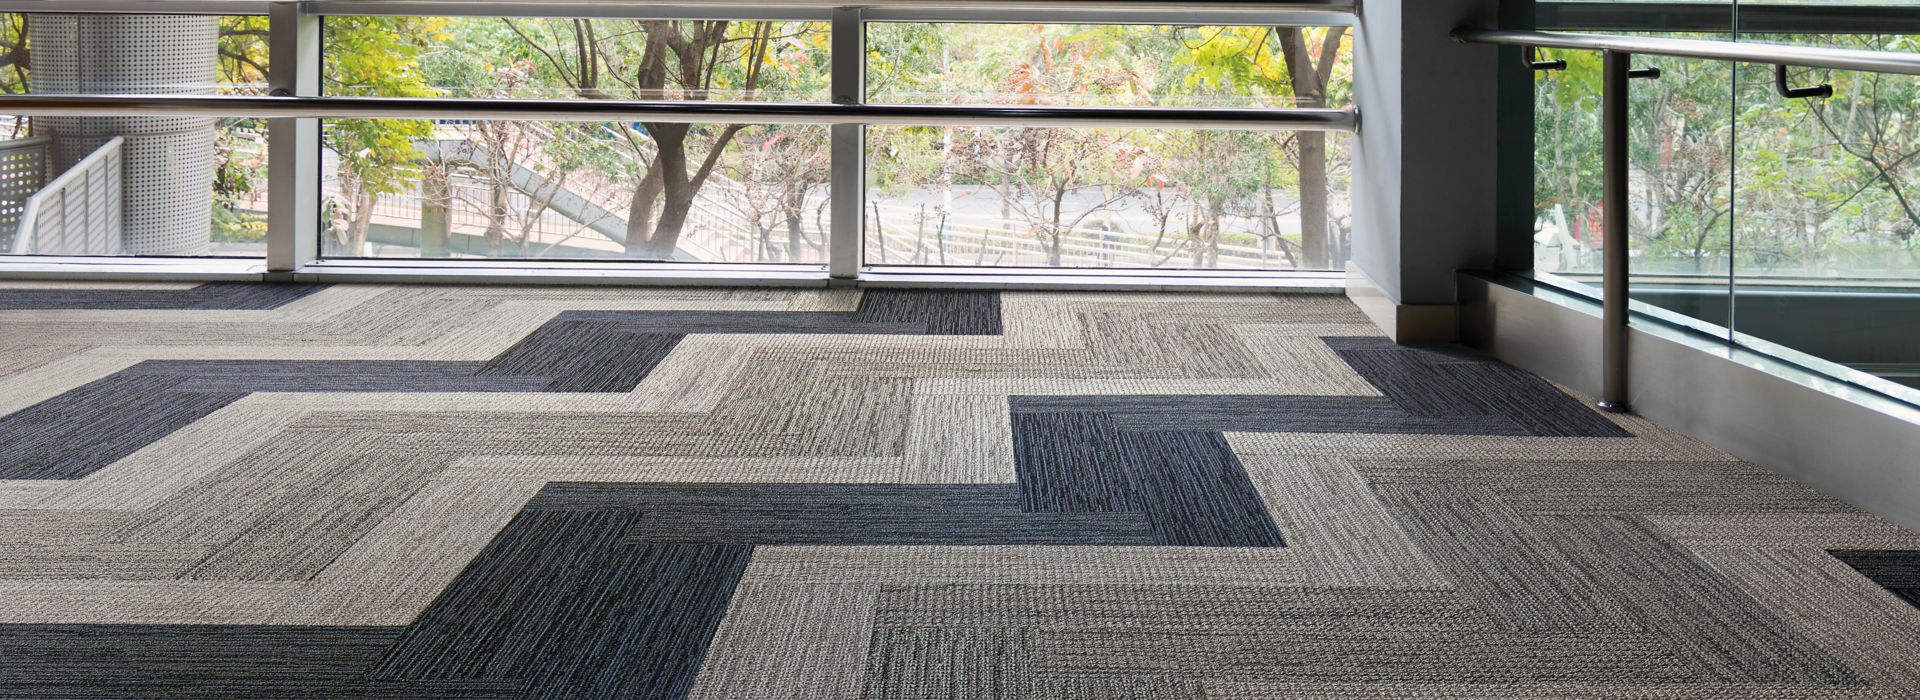 Interface Afternoon Light and Winter Sun carpet tile in open area with glass walls